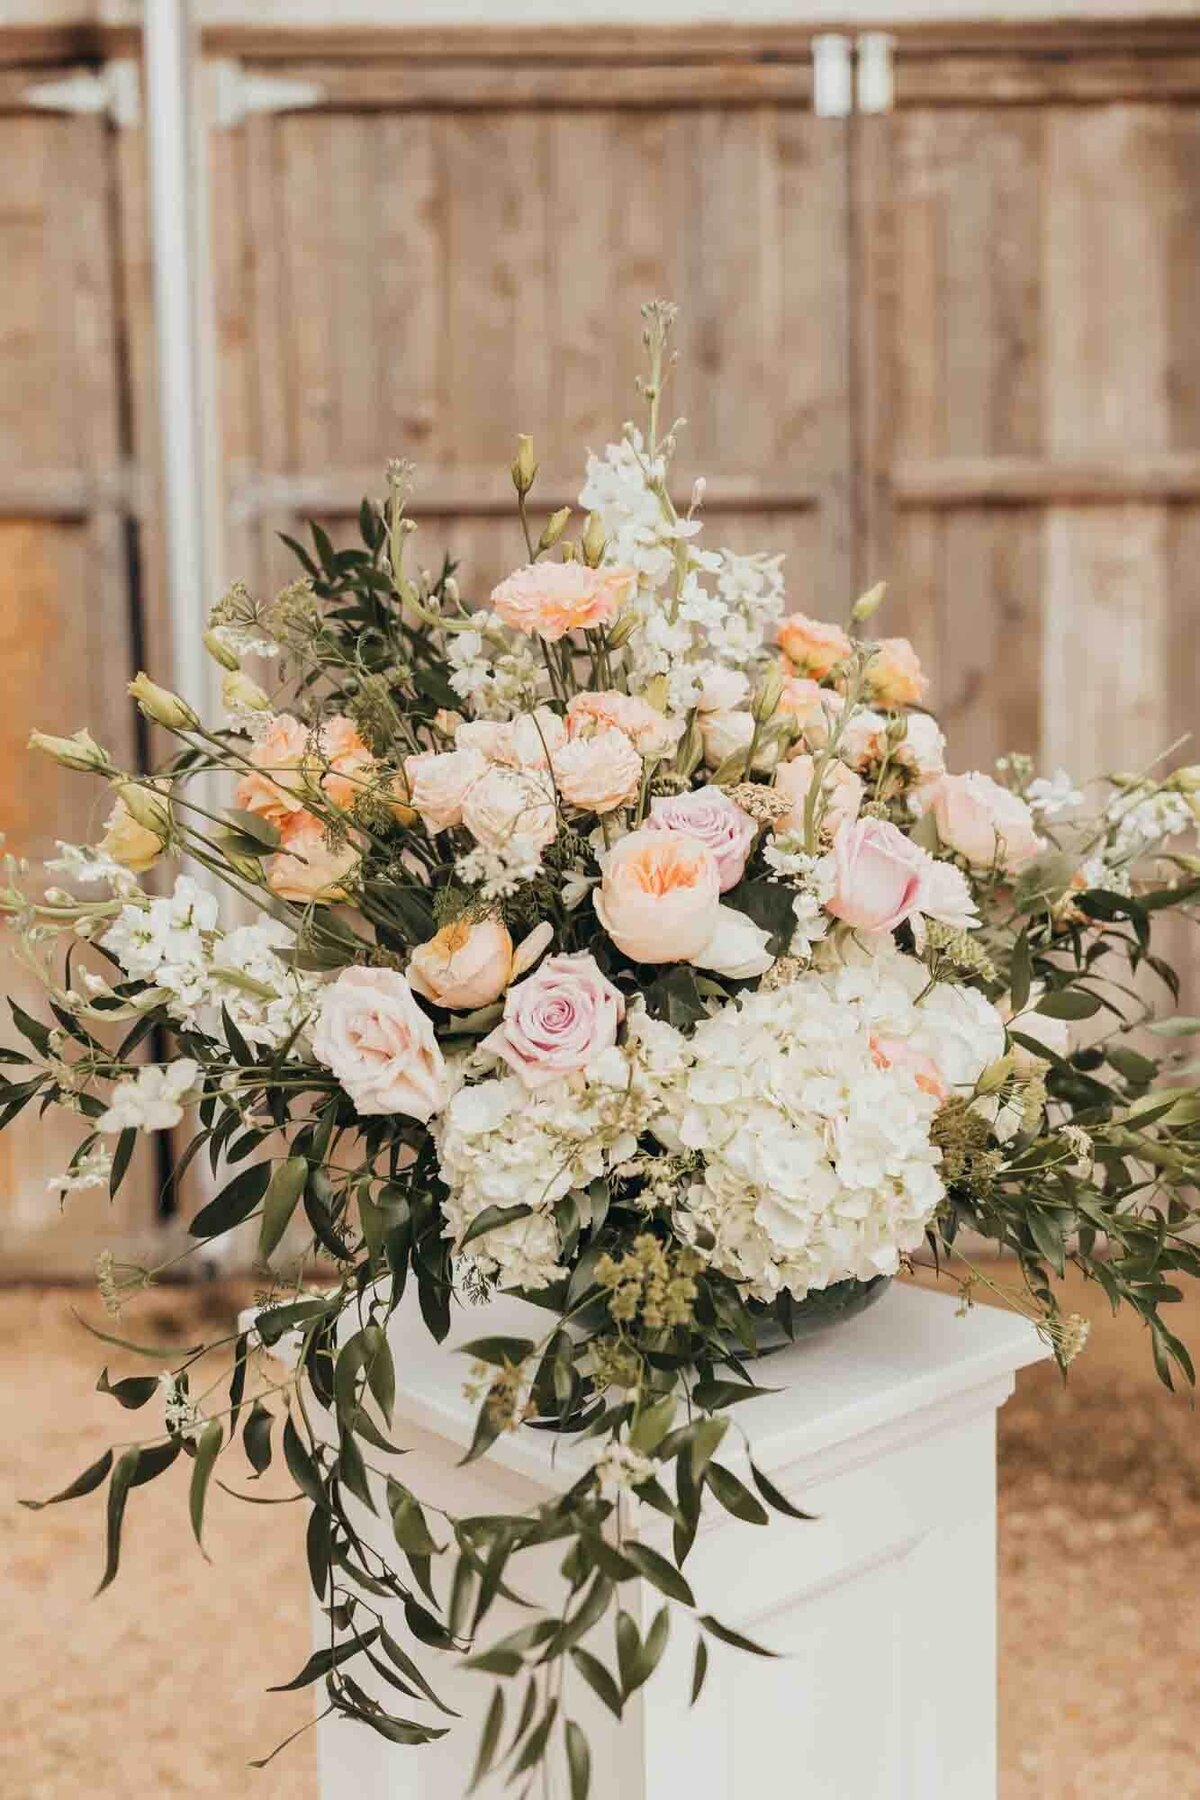 florals sit on top of handmade boxes made by the father of the bride, for the ceremony.